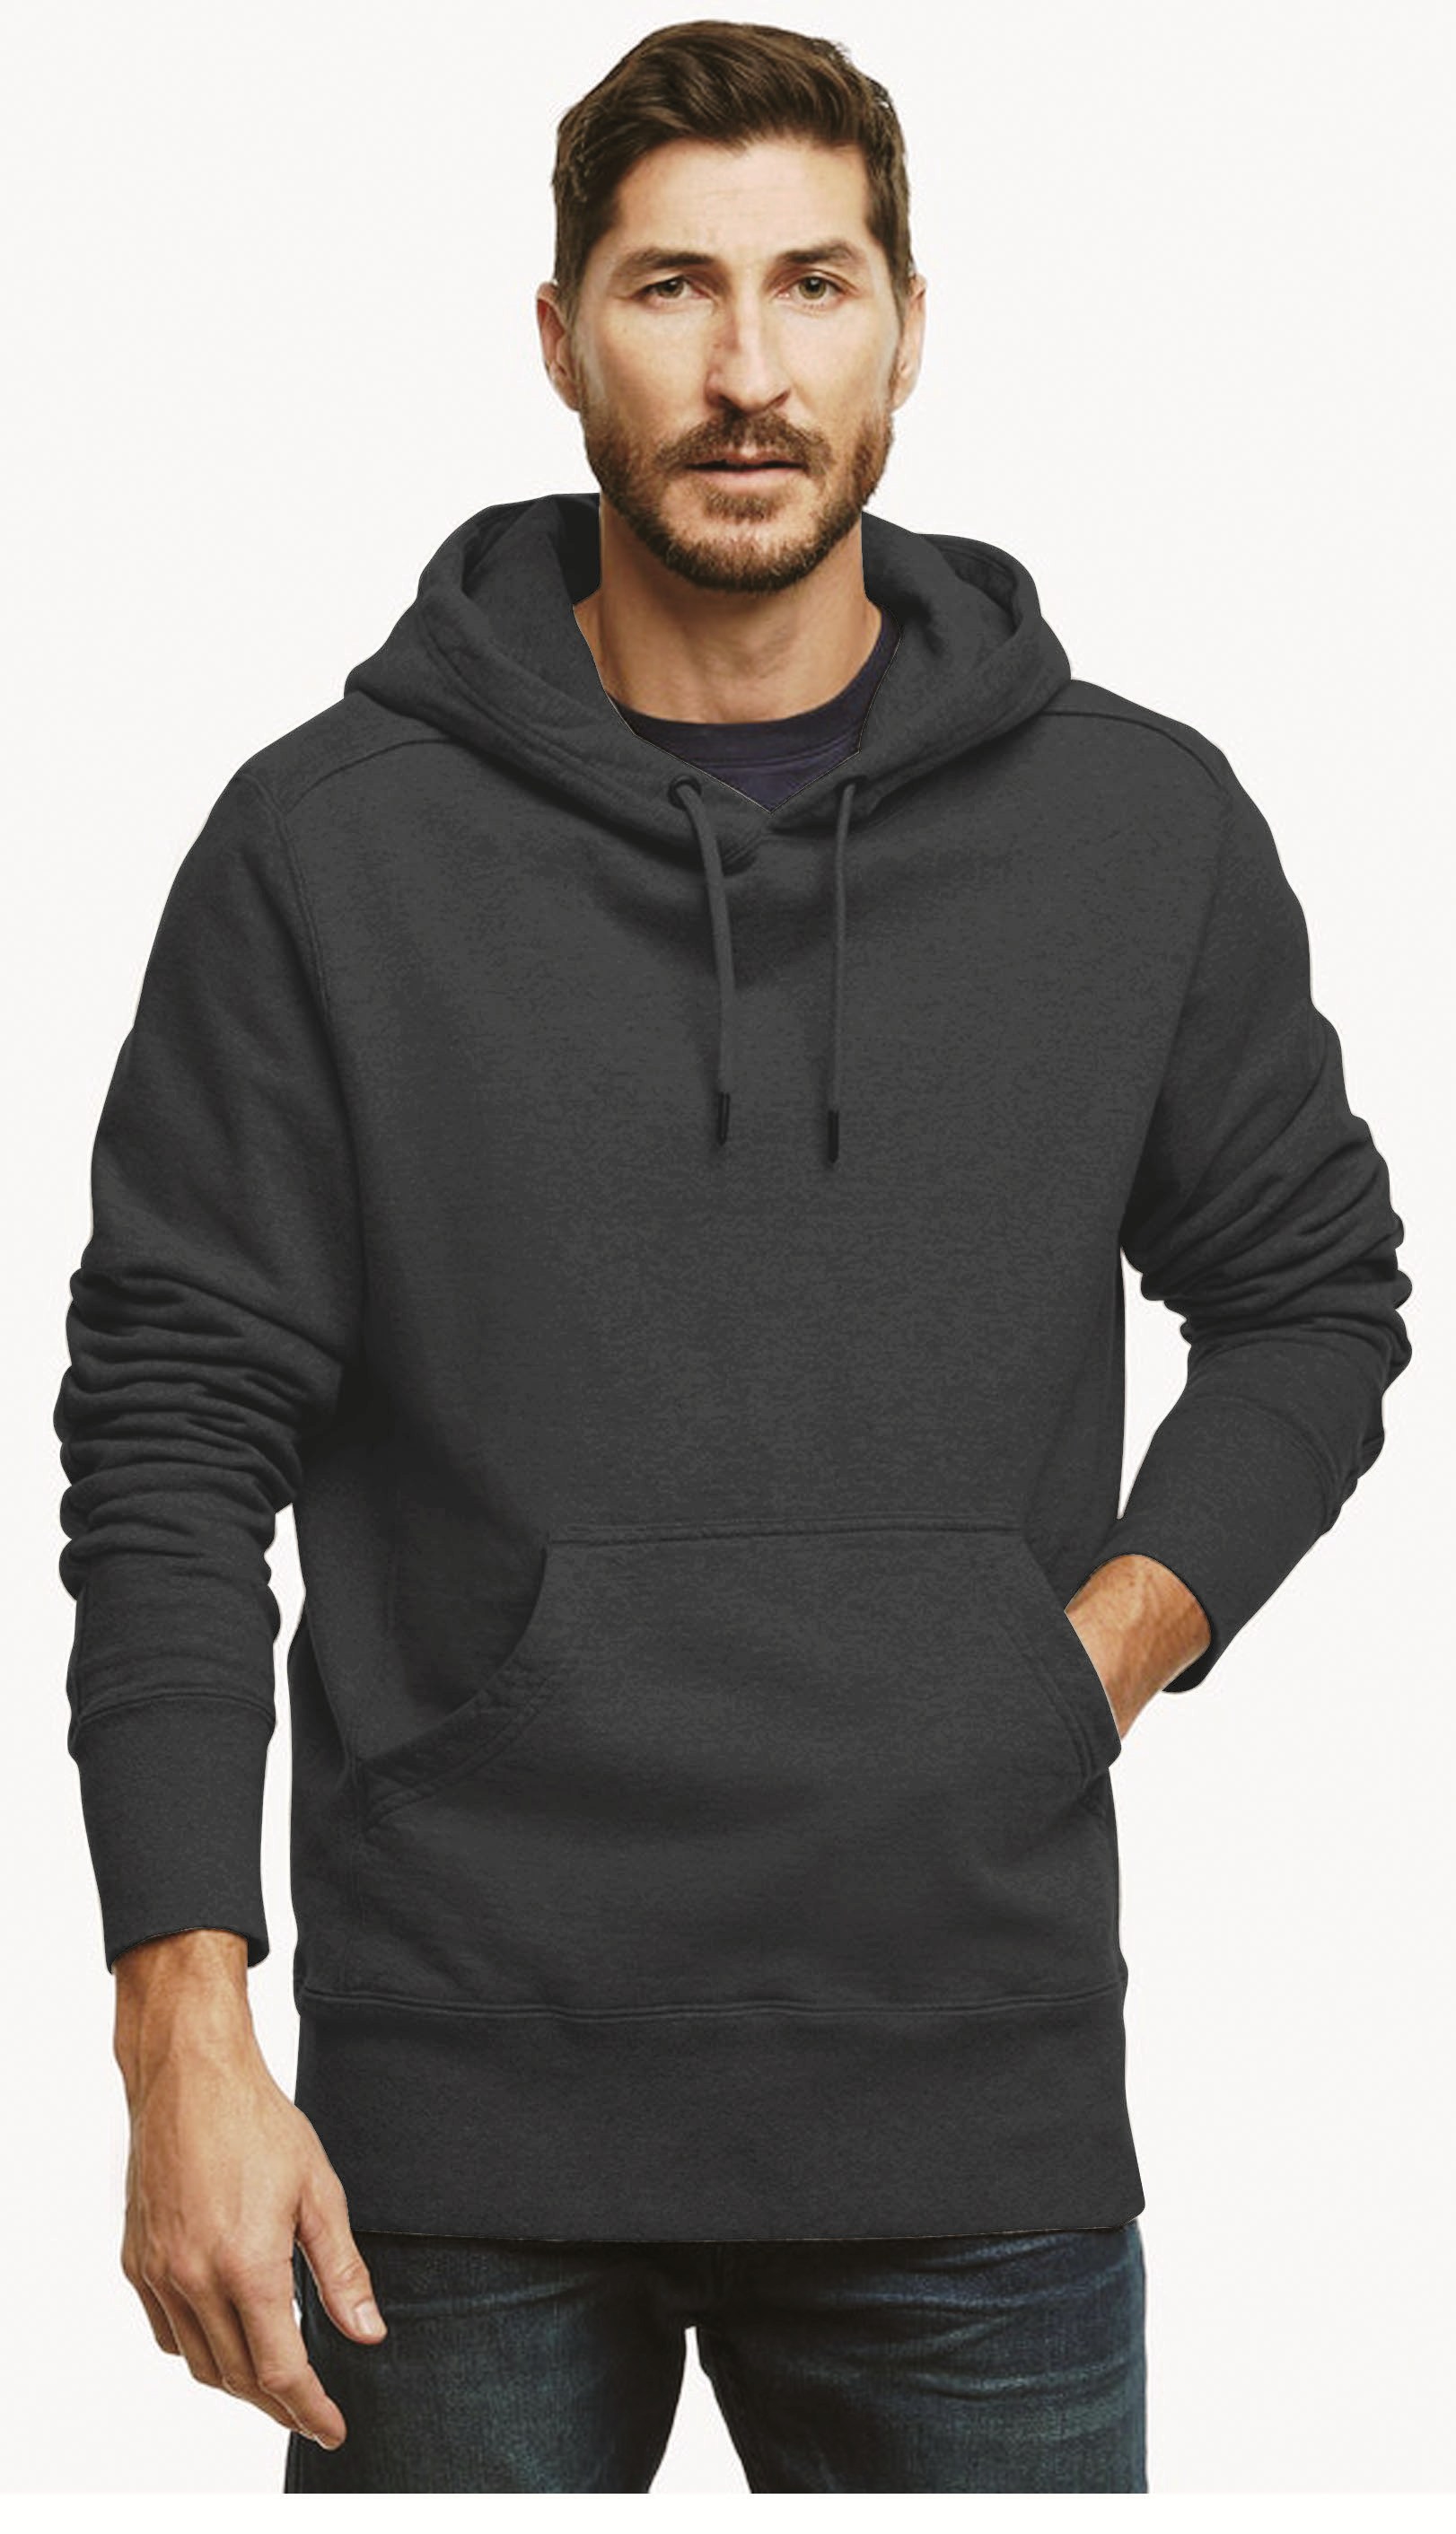 Buy Fab69 Men's Full Sleeve Charcoal Melange Colour Cotton Hoodies with ...